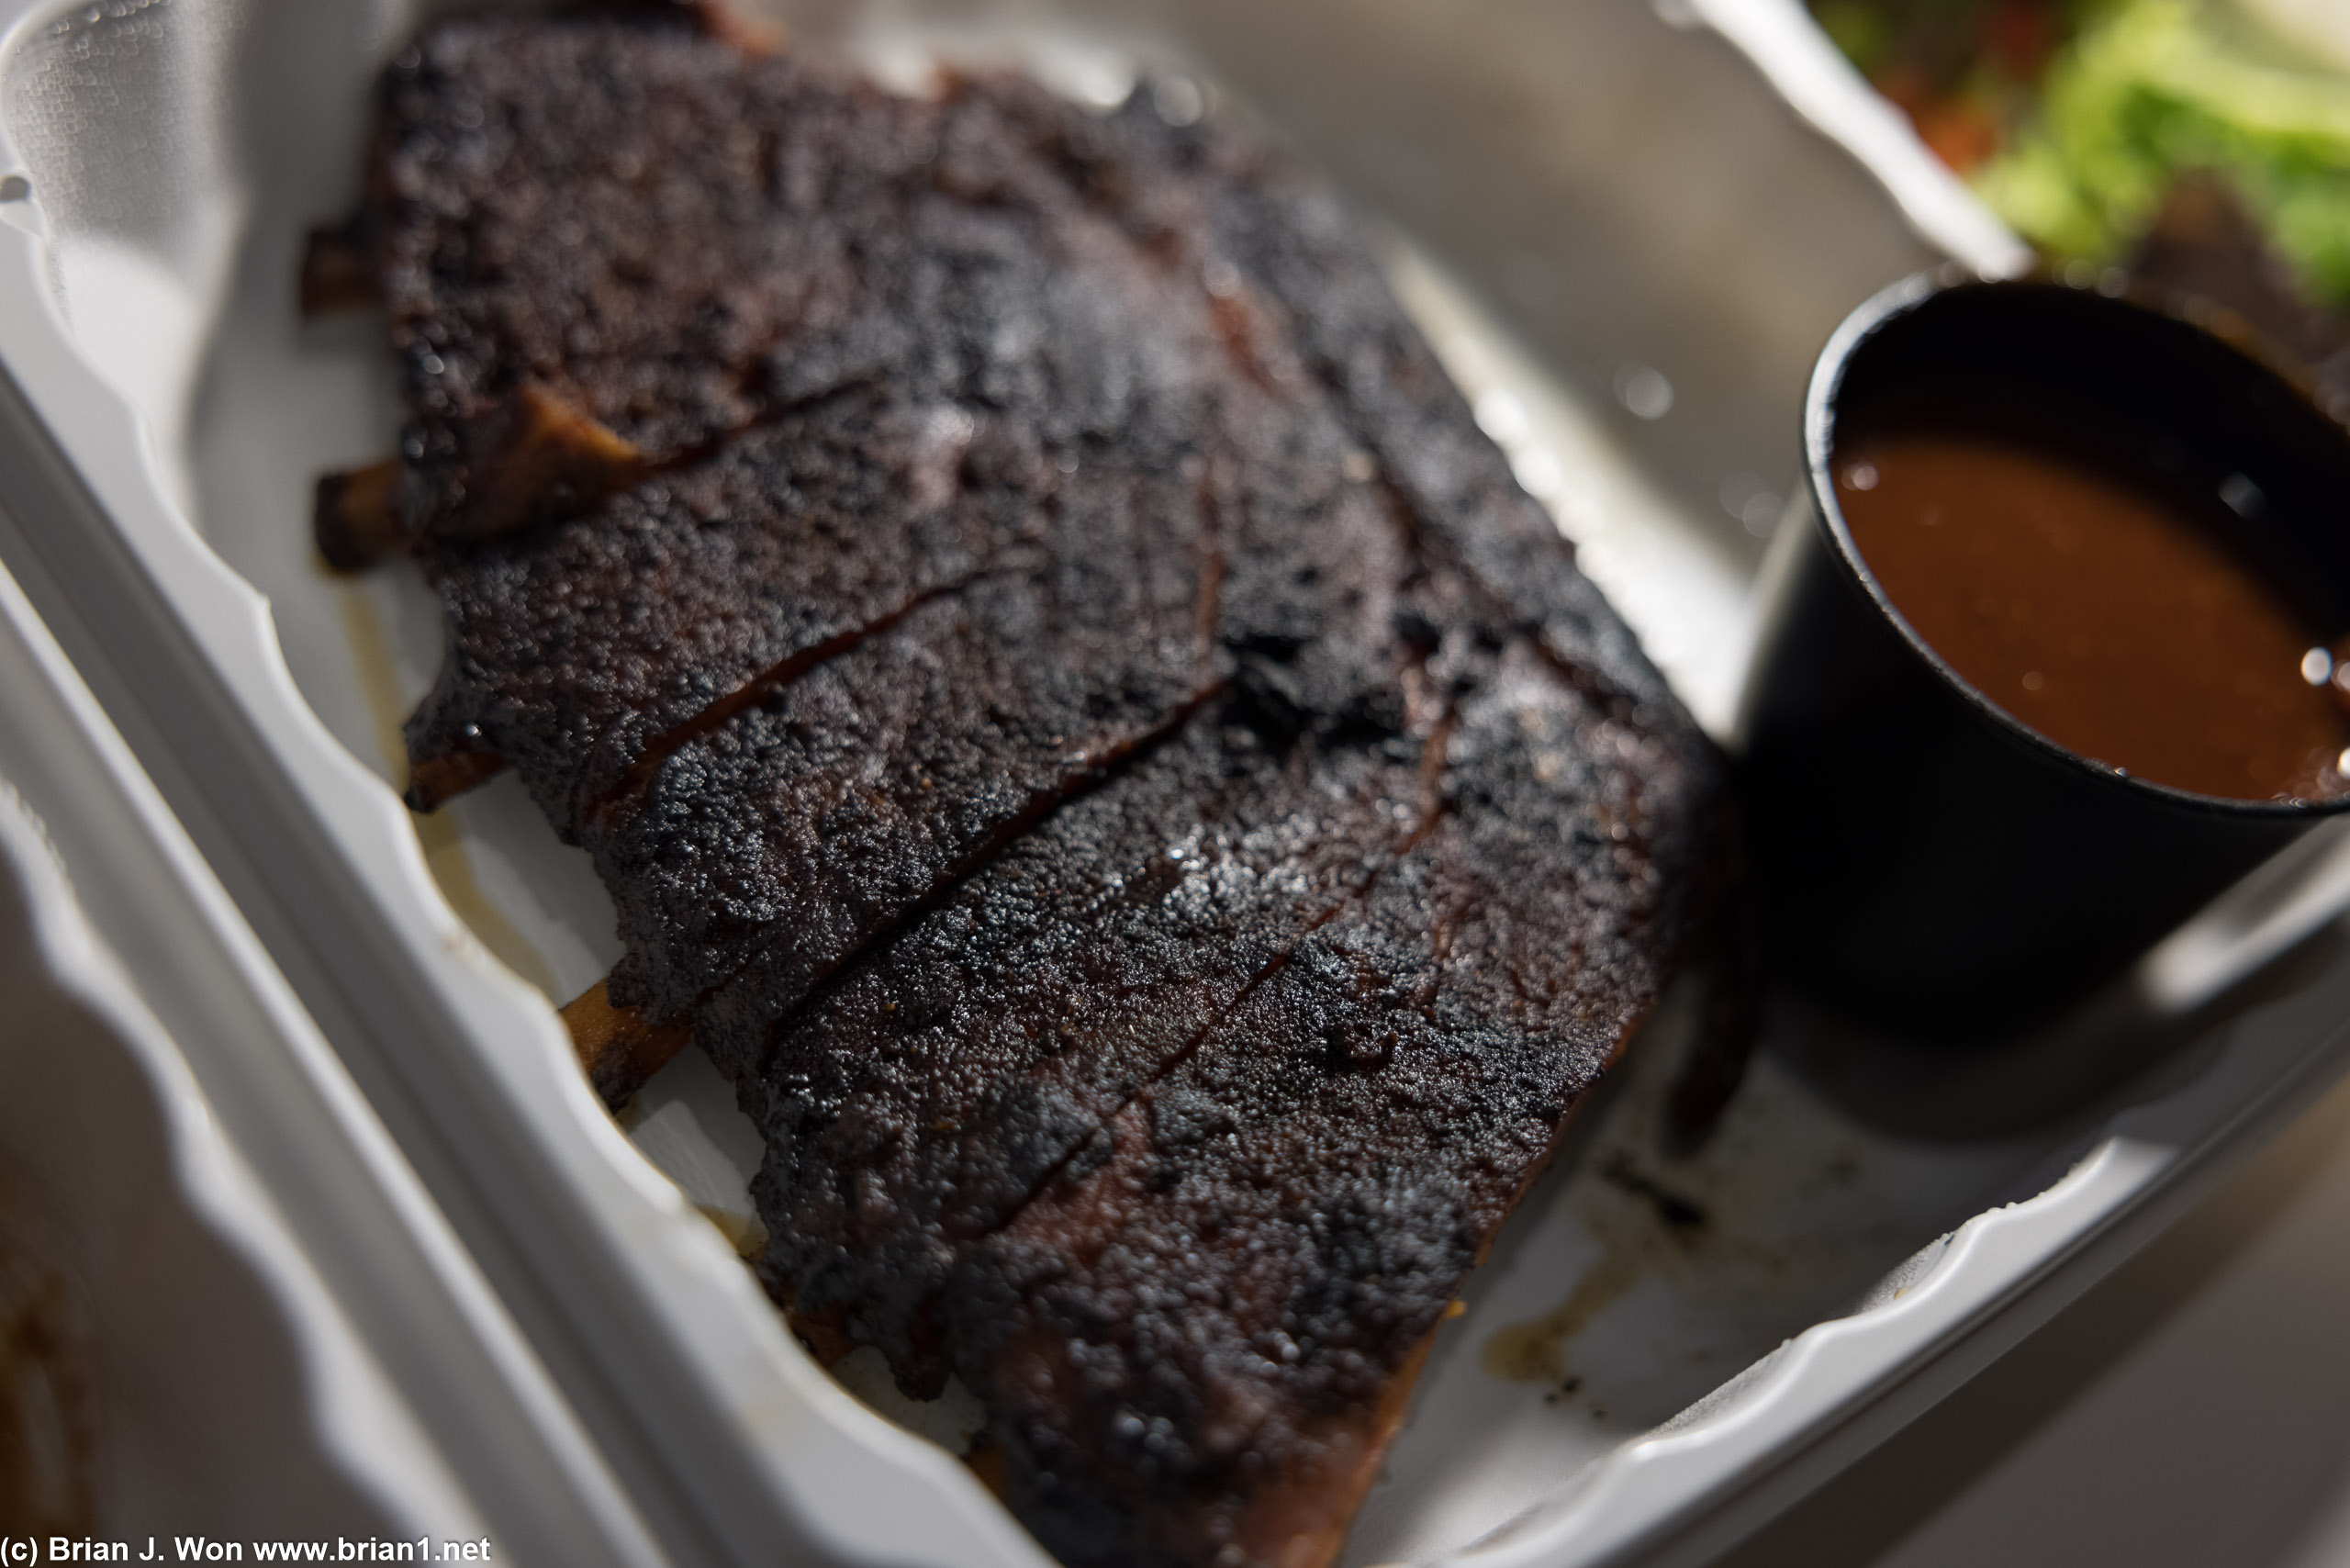 Ribs from Piggyback BBQ were decent but forgettable.